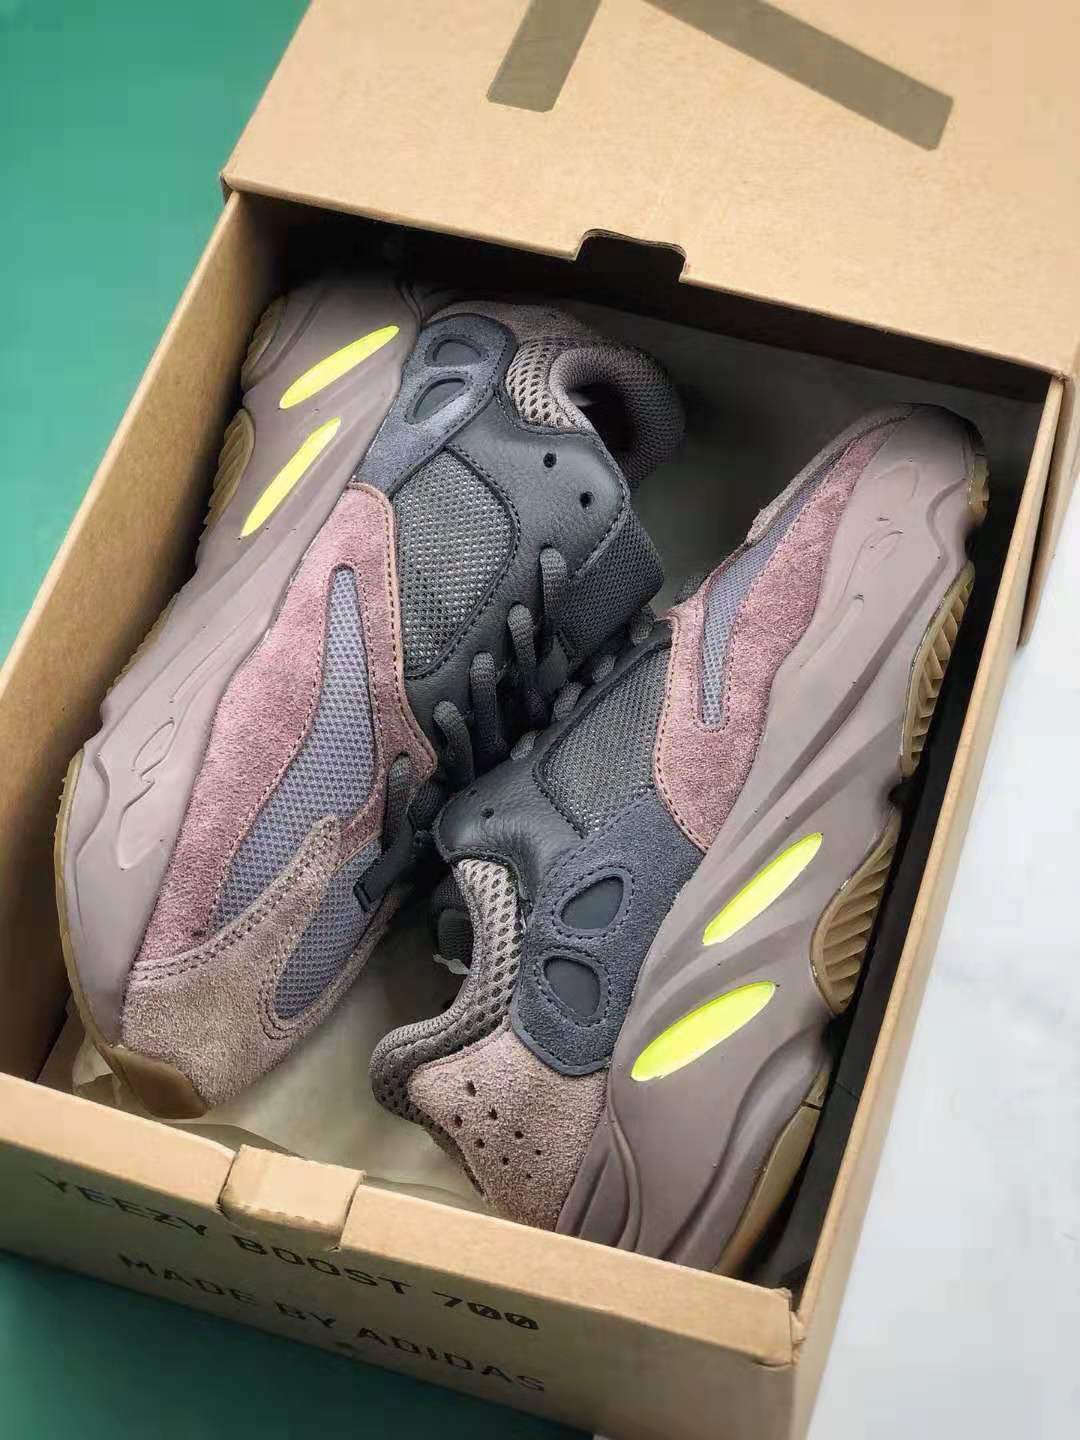 Adidas Yeezy Boost 700 'Mauve' EE9614 - Shop the Latest Release